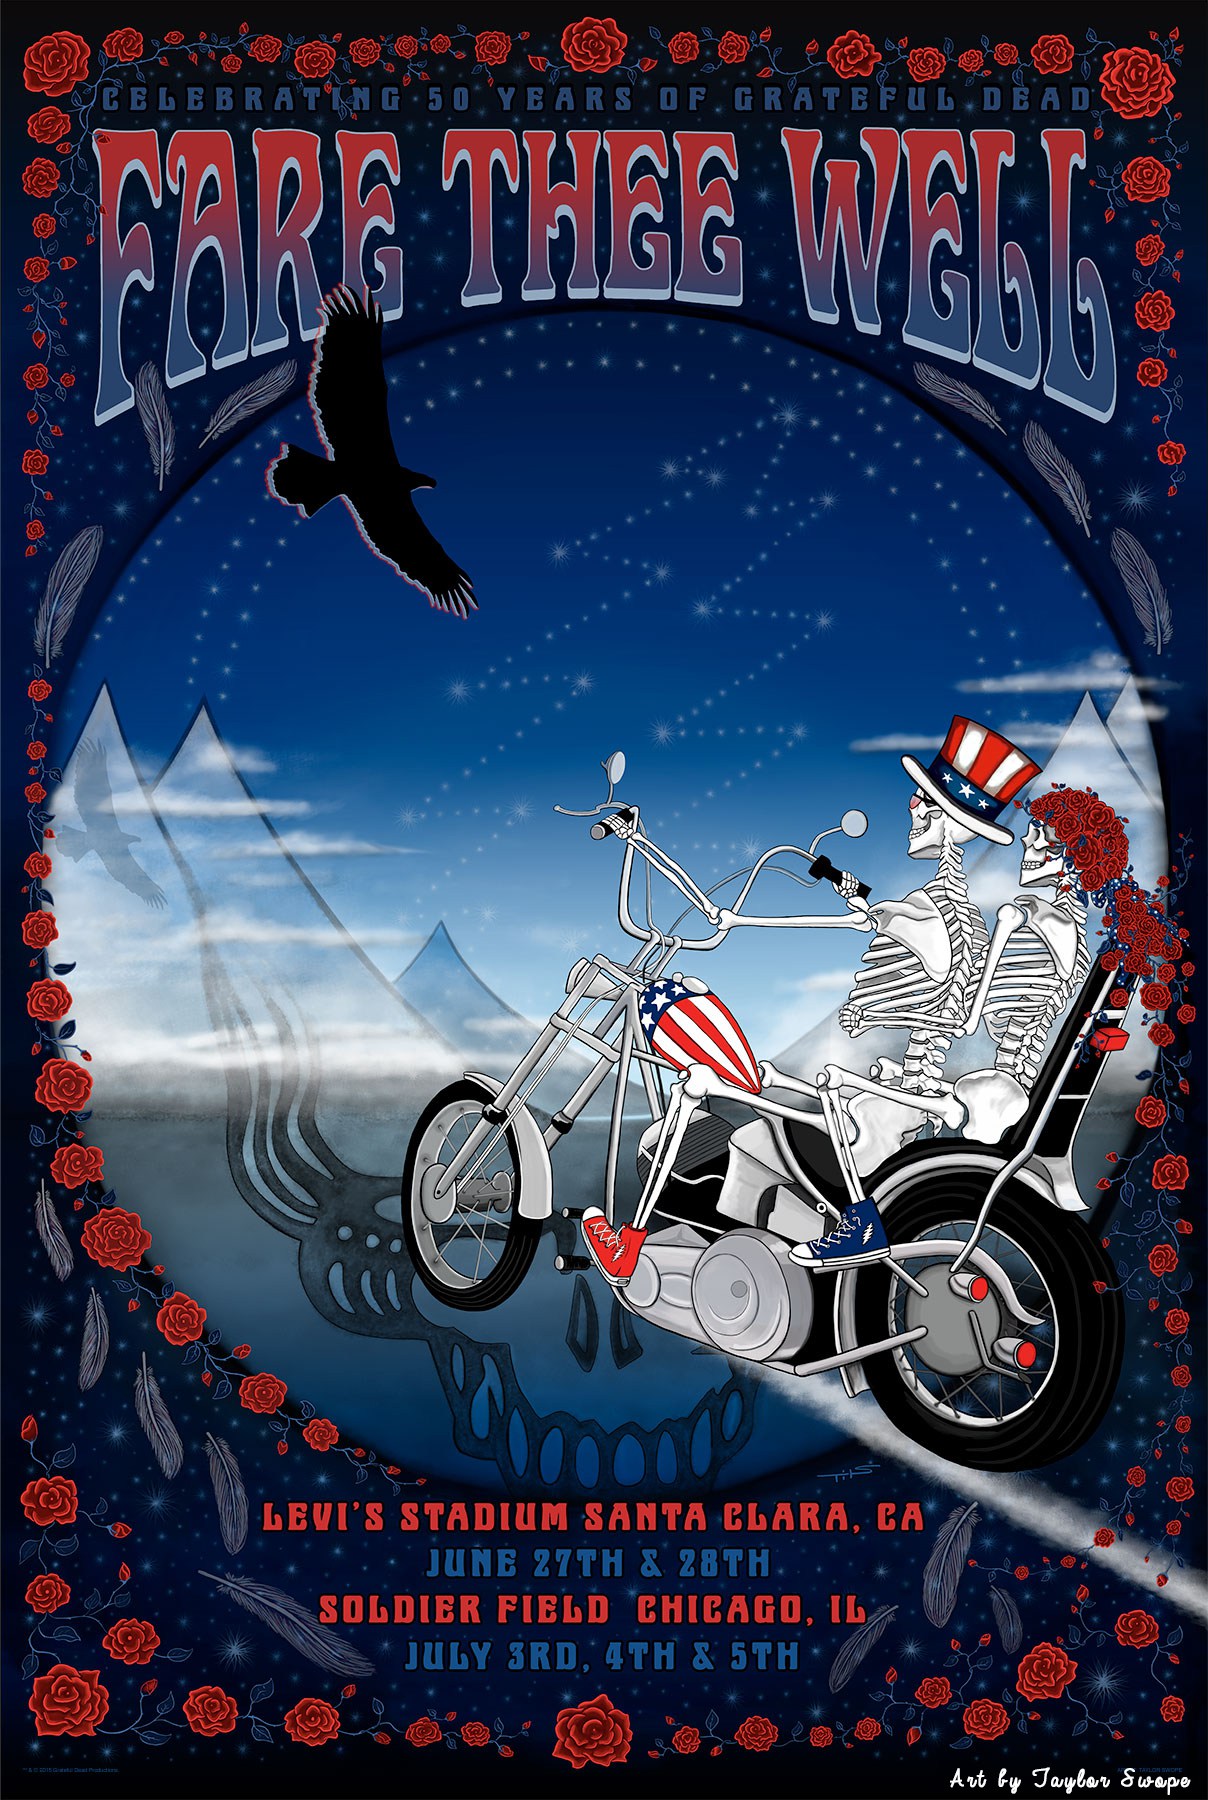 Taylor Swope’s Official Fare Thee Well Poster